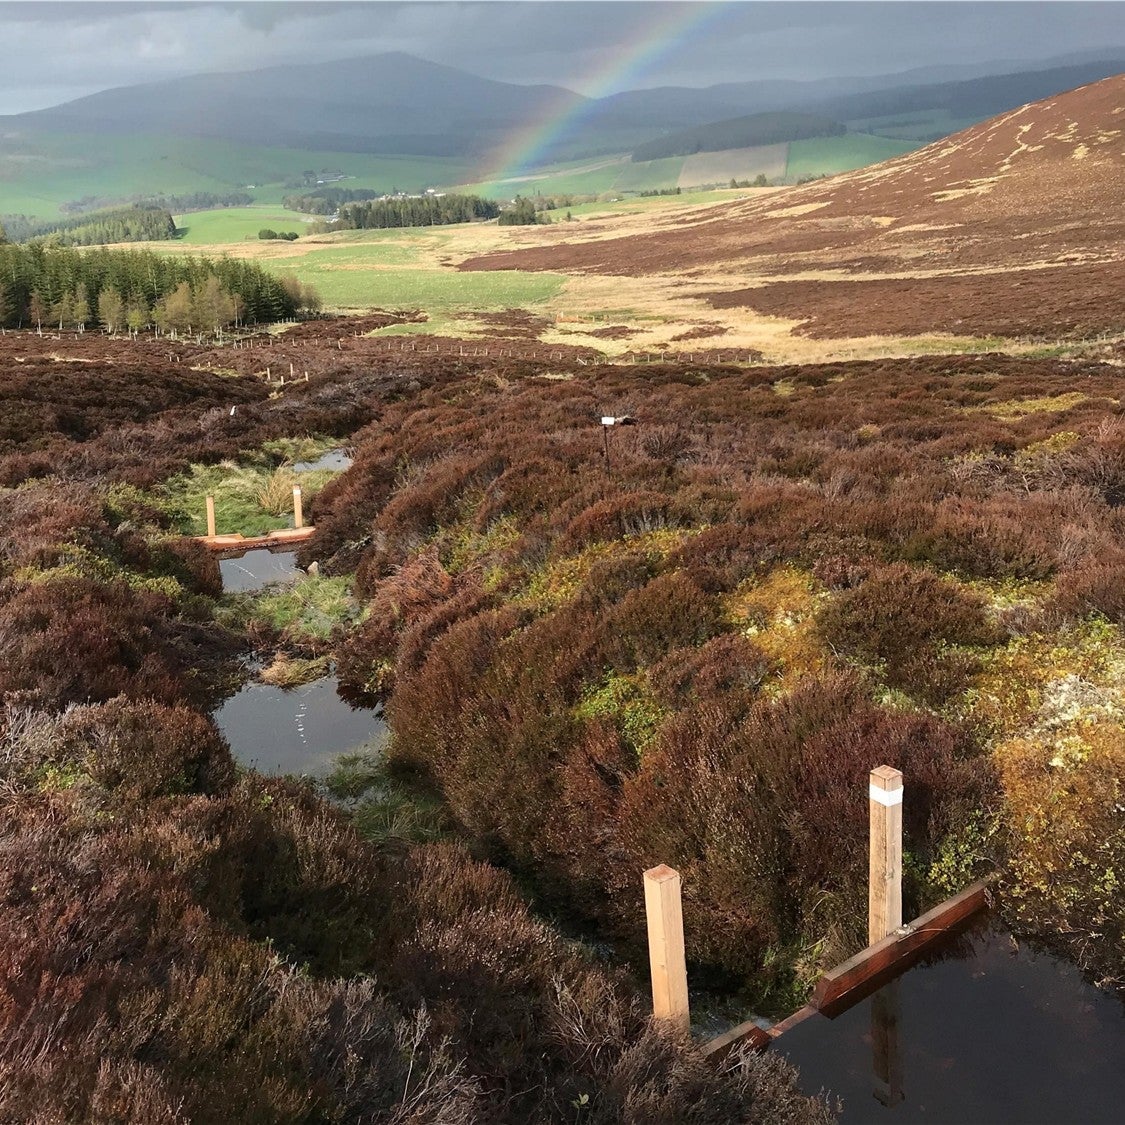 Images of dams that could retain water to be used in distilleries during dry periods (University of Aberdeen/PA)